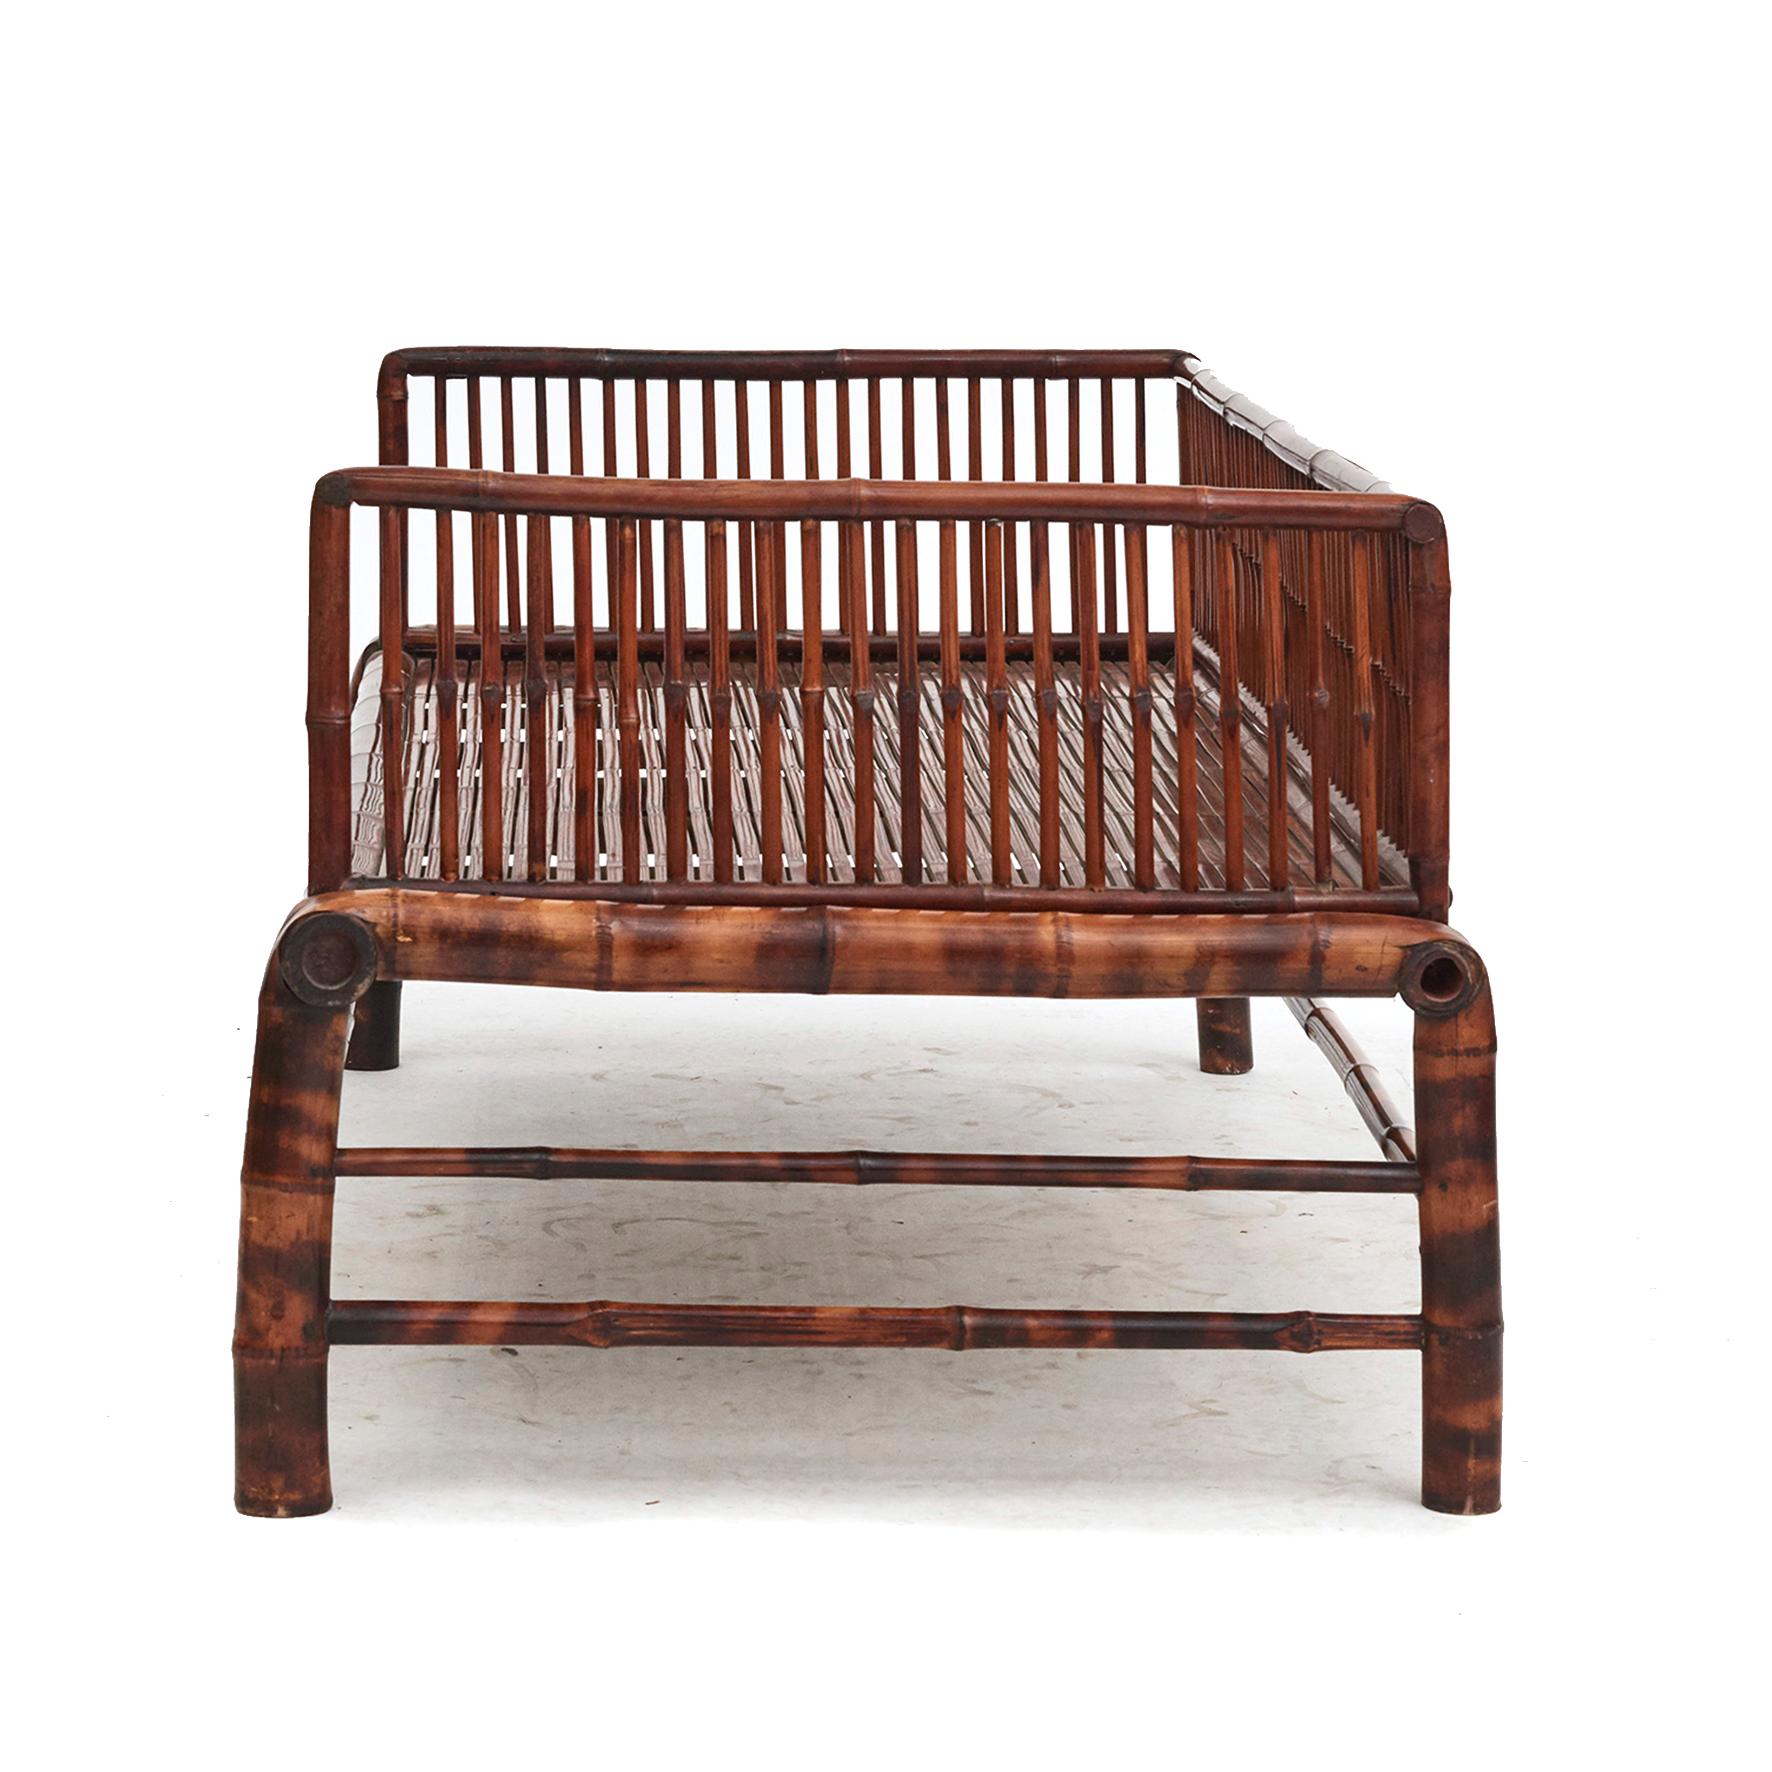 balinese daybed